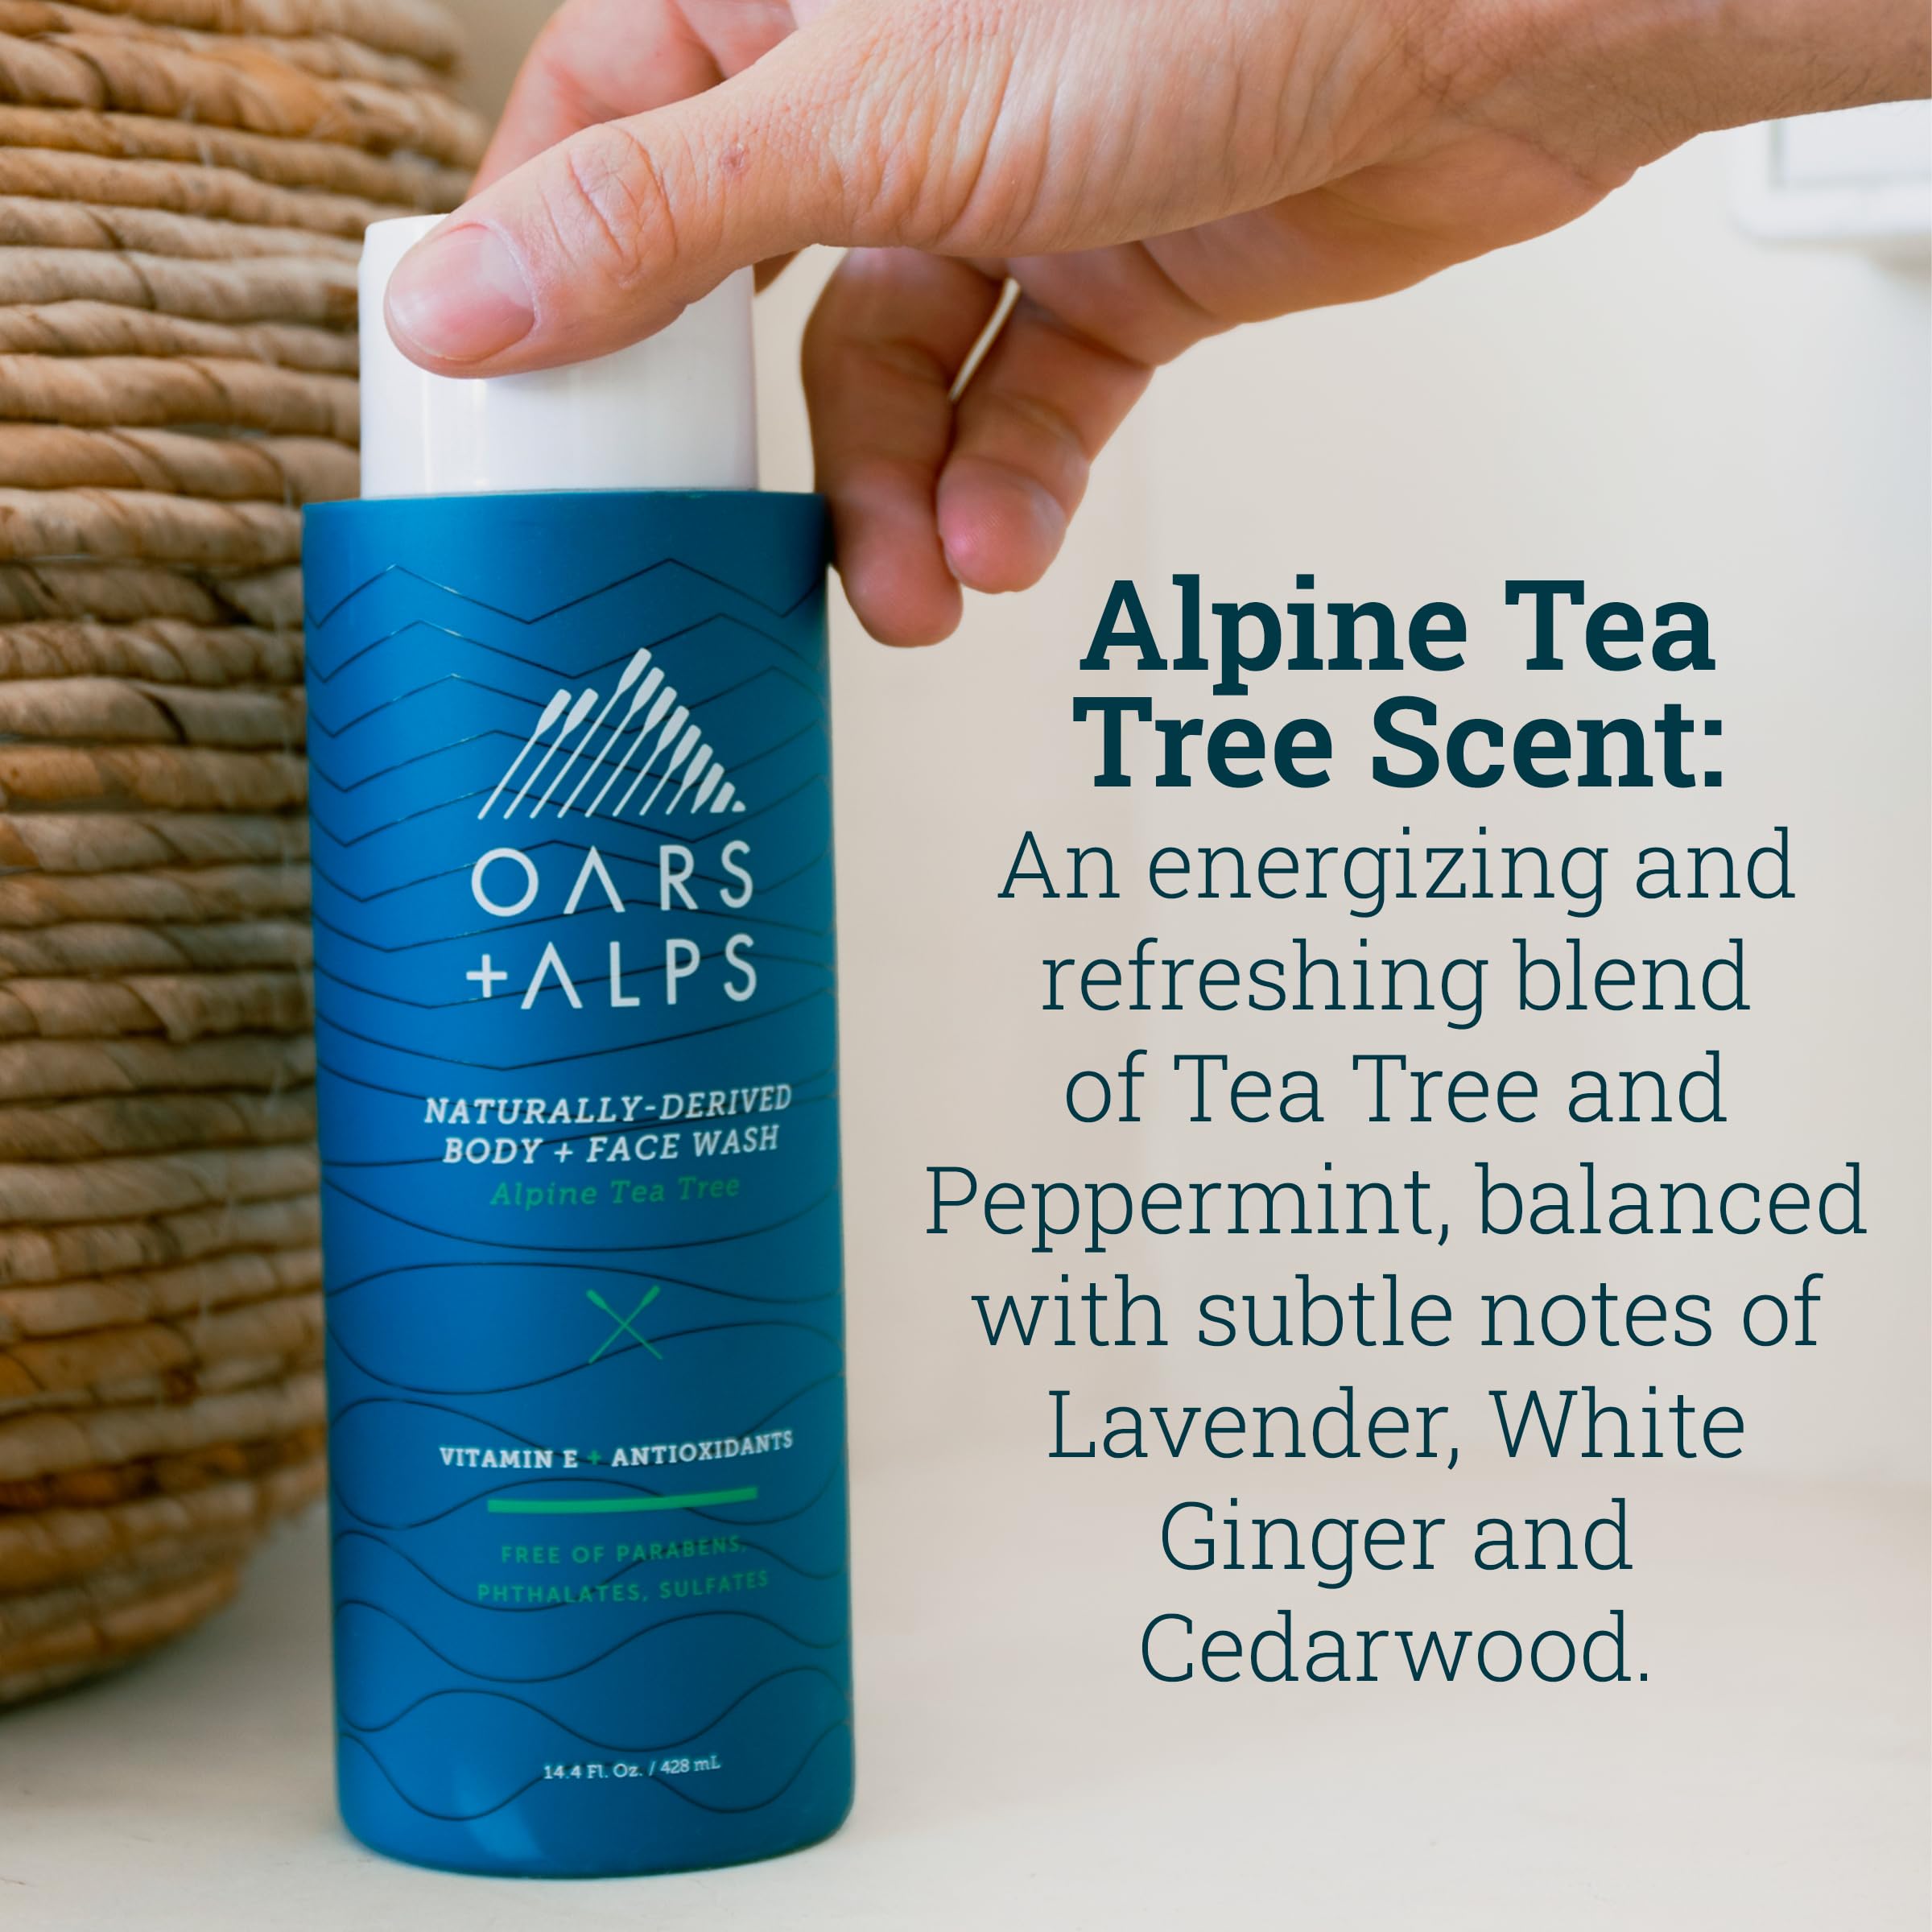 Oars + Alps Mens Moisturizing Body and Face Wash, Skin Care Infused with Vitamin E and Antioxidants, Sulfate Free, Alpine Tea Tree, 1 Pack